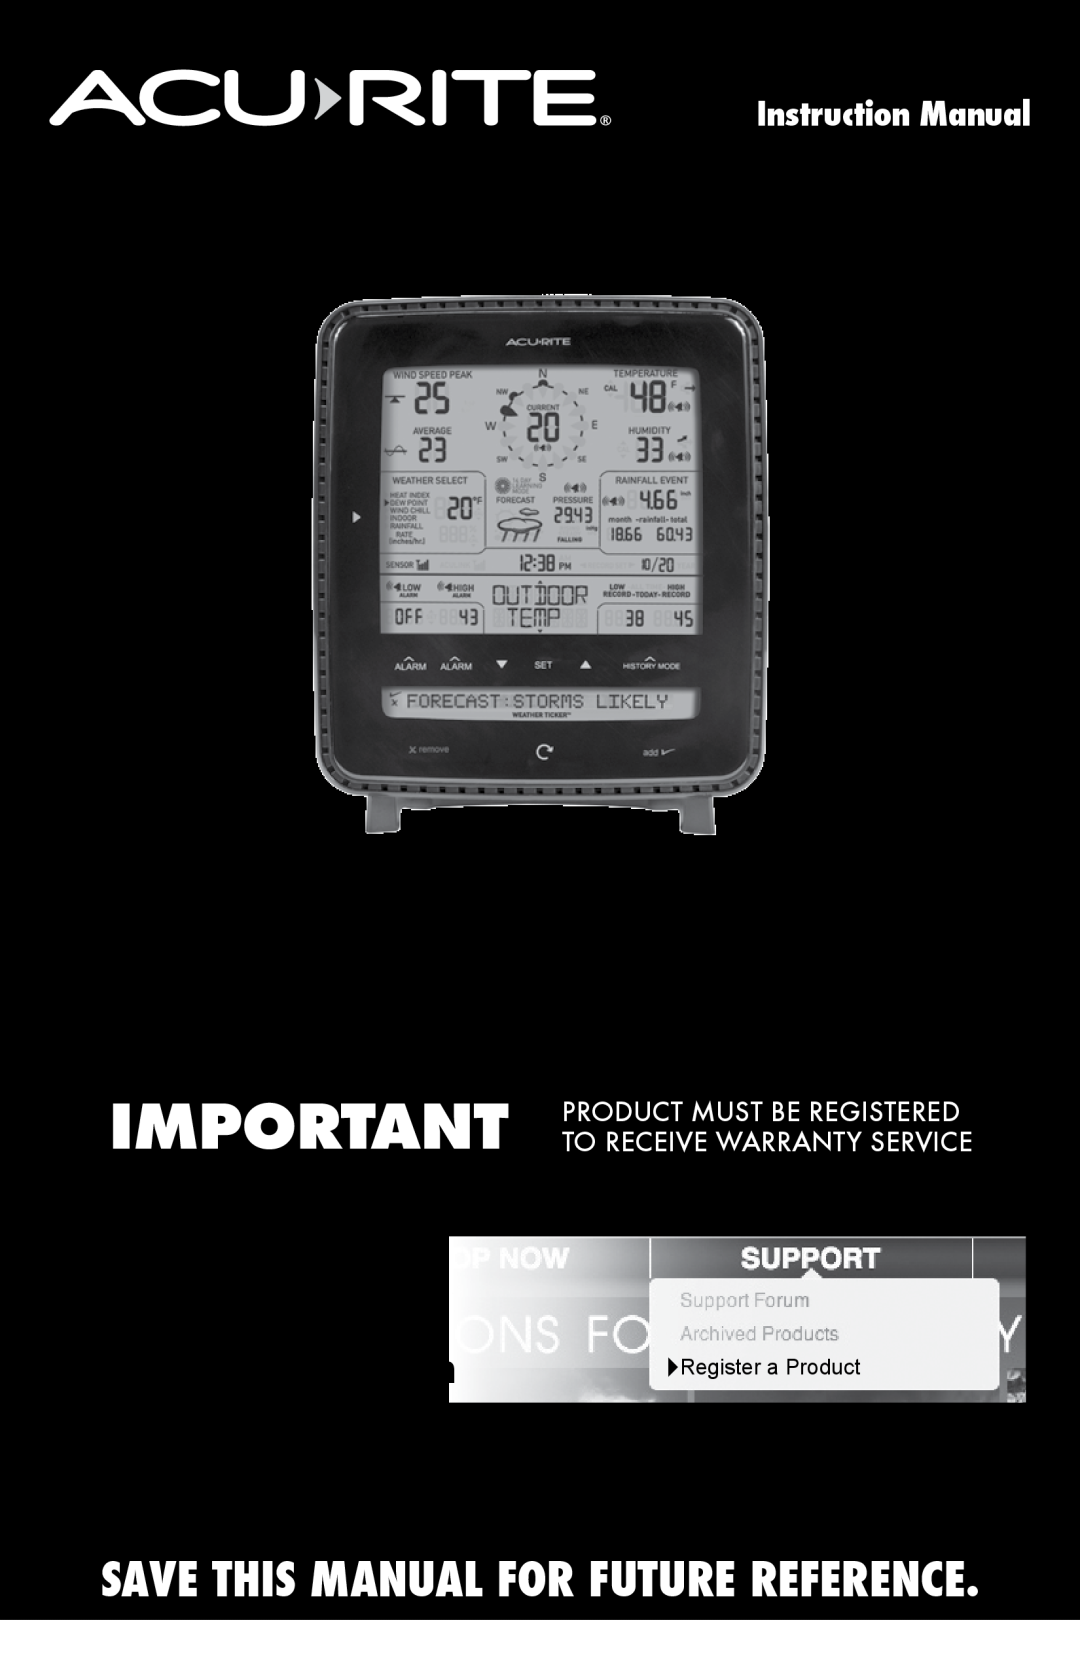 Acu-Rite instruction manual Package Contents, model 1500RX, Instruction Manual, Display for 5-in-1 Weather Sensor 